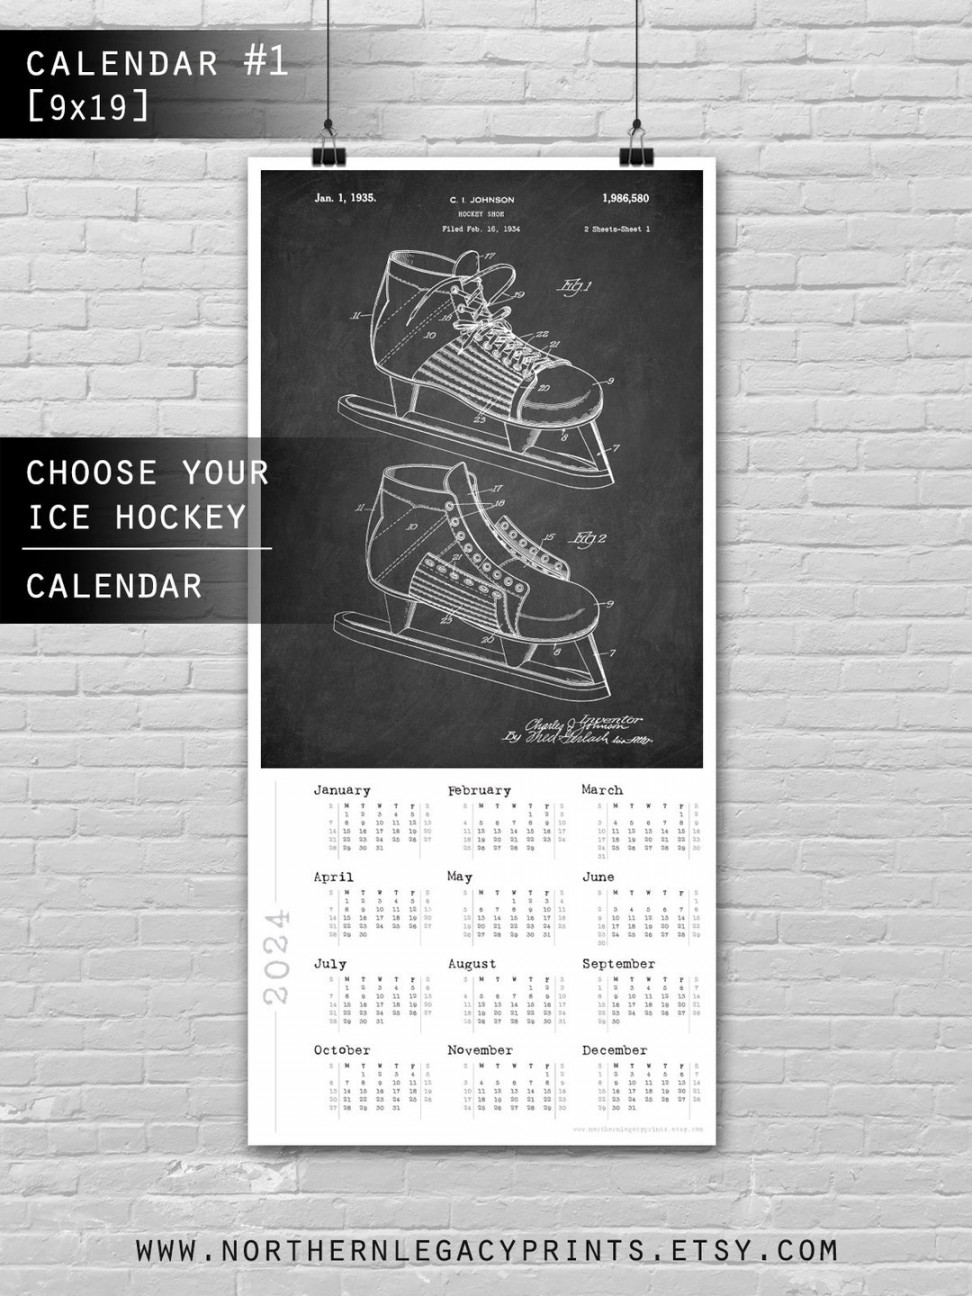 One Page CALENDAR, Vintage Ice Hockey Patent Calendar Print, Sport  Hockey Patent Art Print,  Calendar Wall Art Poster, Cool Gift - Etsy